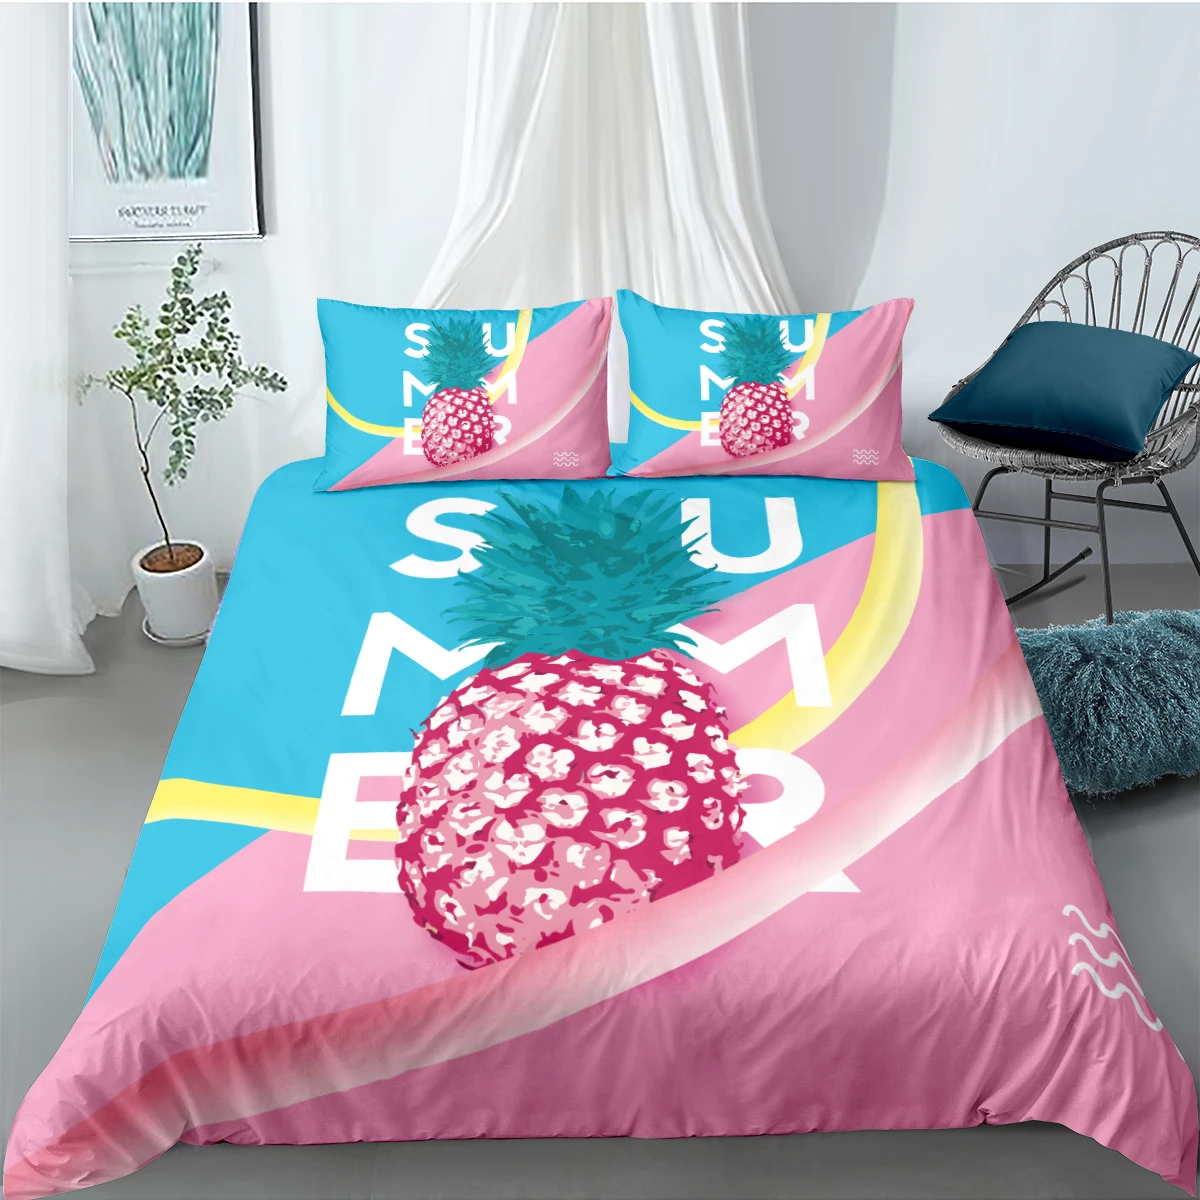 

3D Pineapple Duvet Cover Sets Modern Bed Linens and Pillow Sham Full Double Single Twin Queen King Size 203*230cm Bedclothes